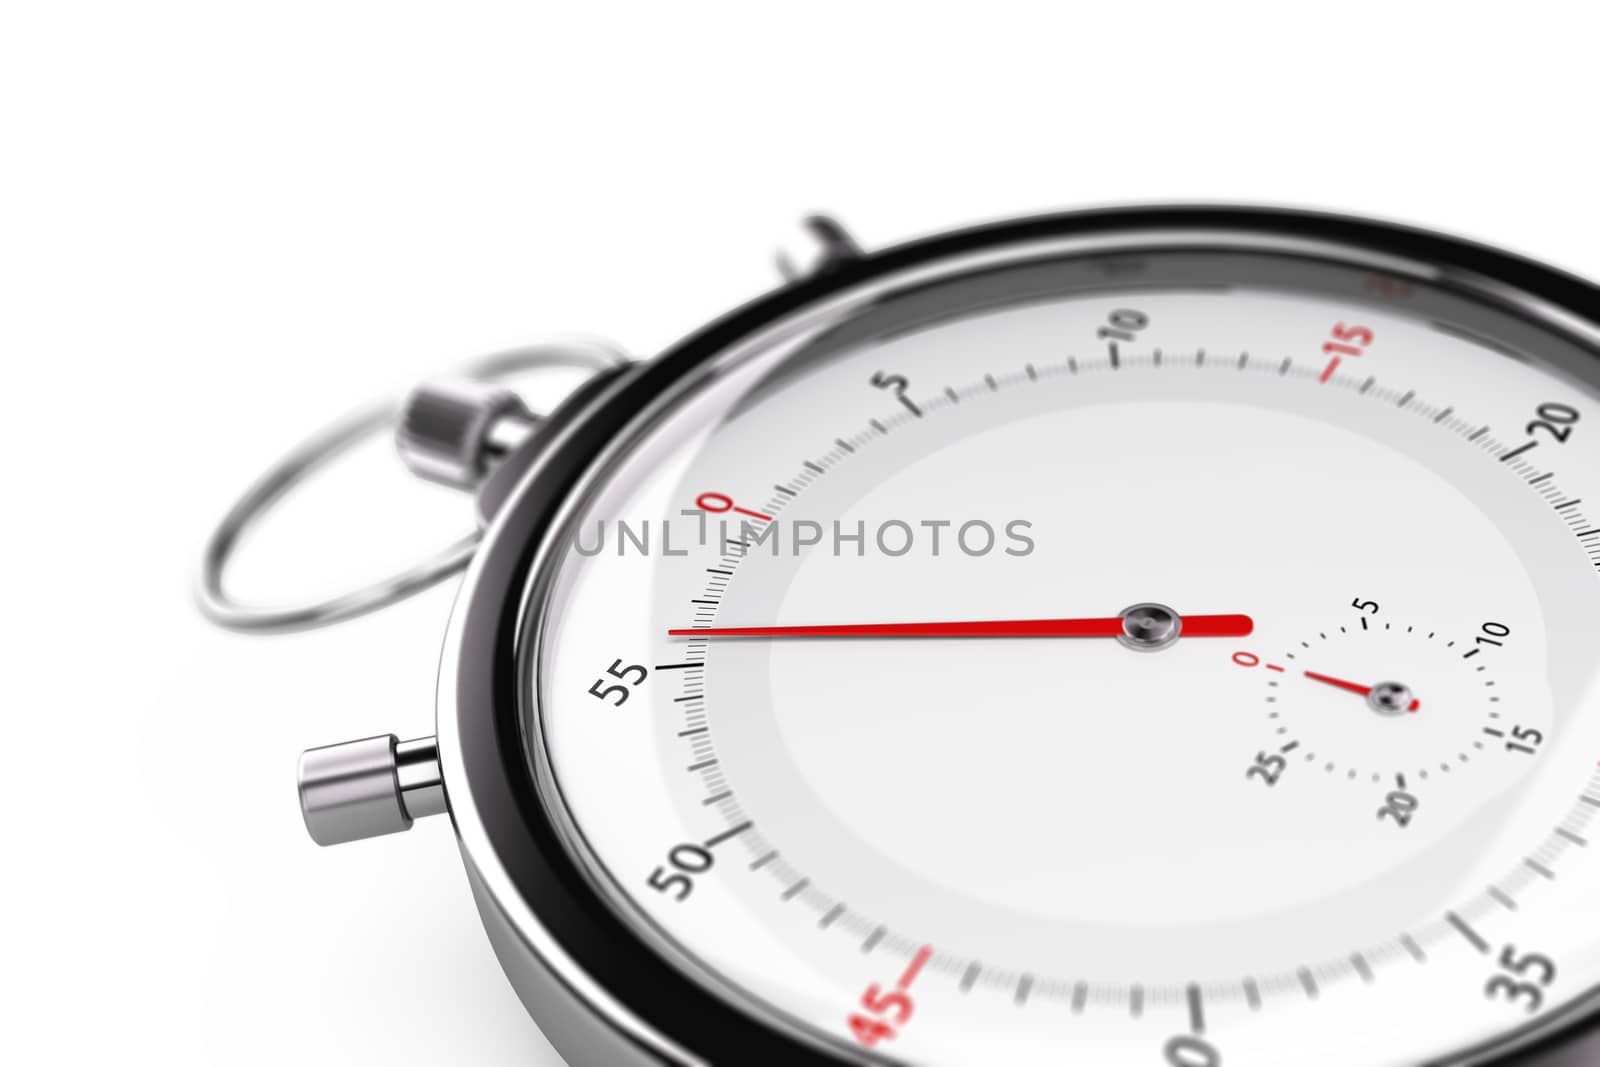 Stopwatch with the needle pointing 55 seconds. Object over white background with blur effet suitable for a time management concept illustration.